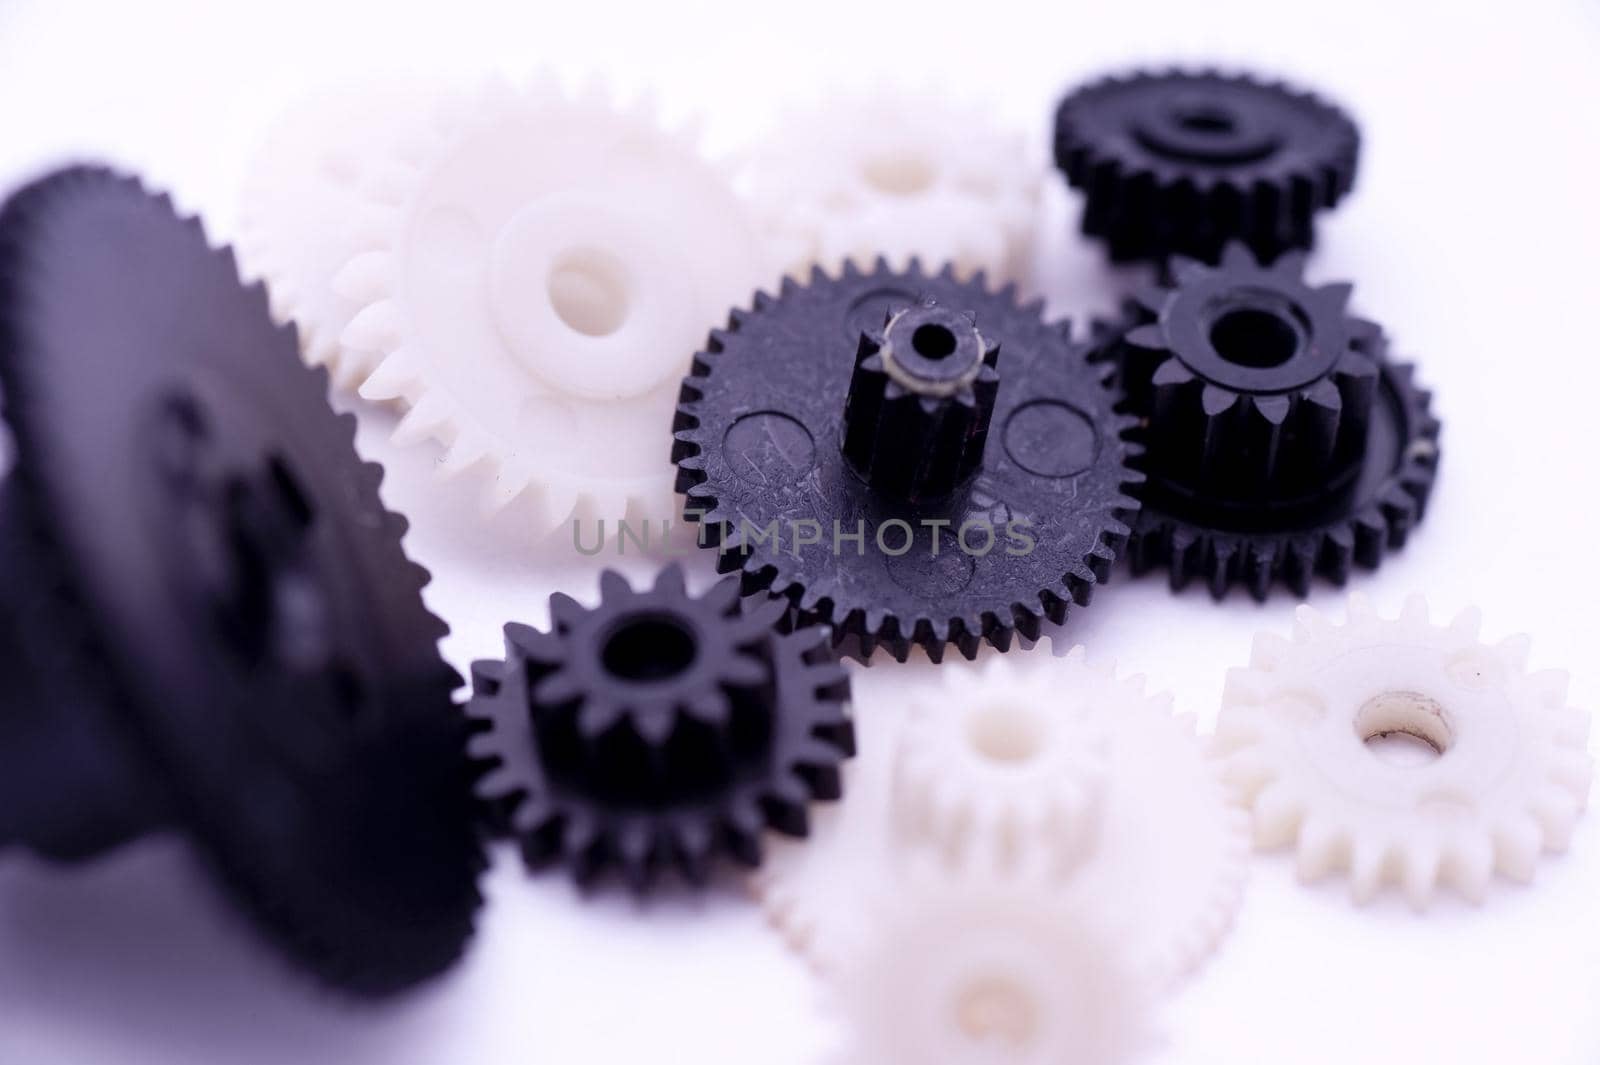 Team Work Concept Using Black and White Gears by sanisra